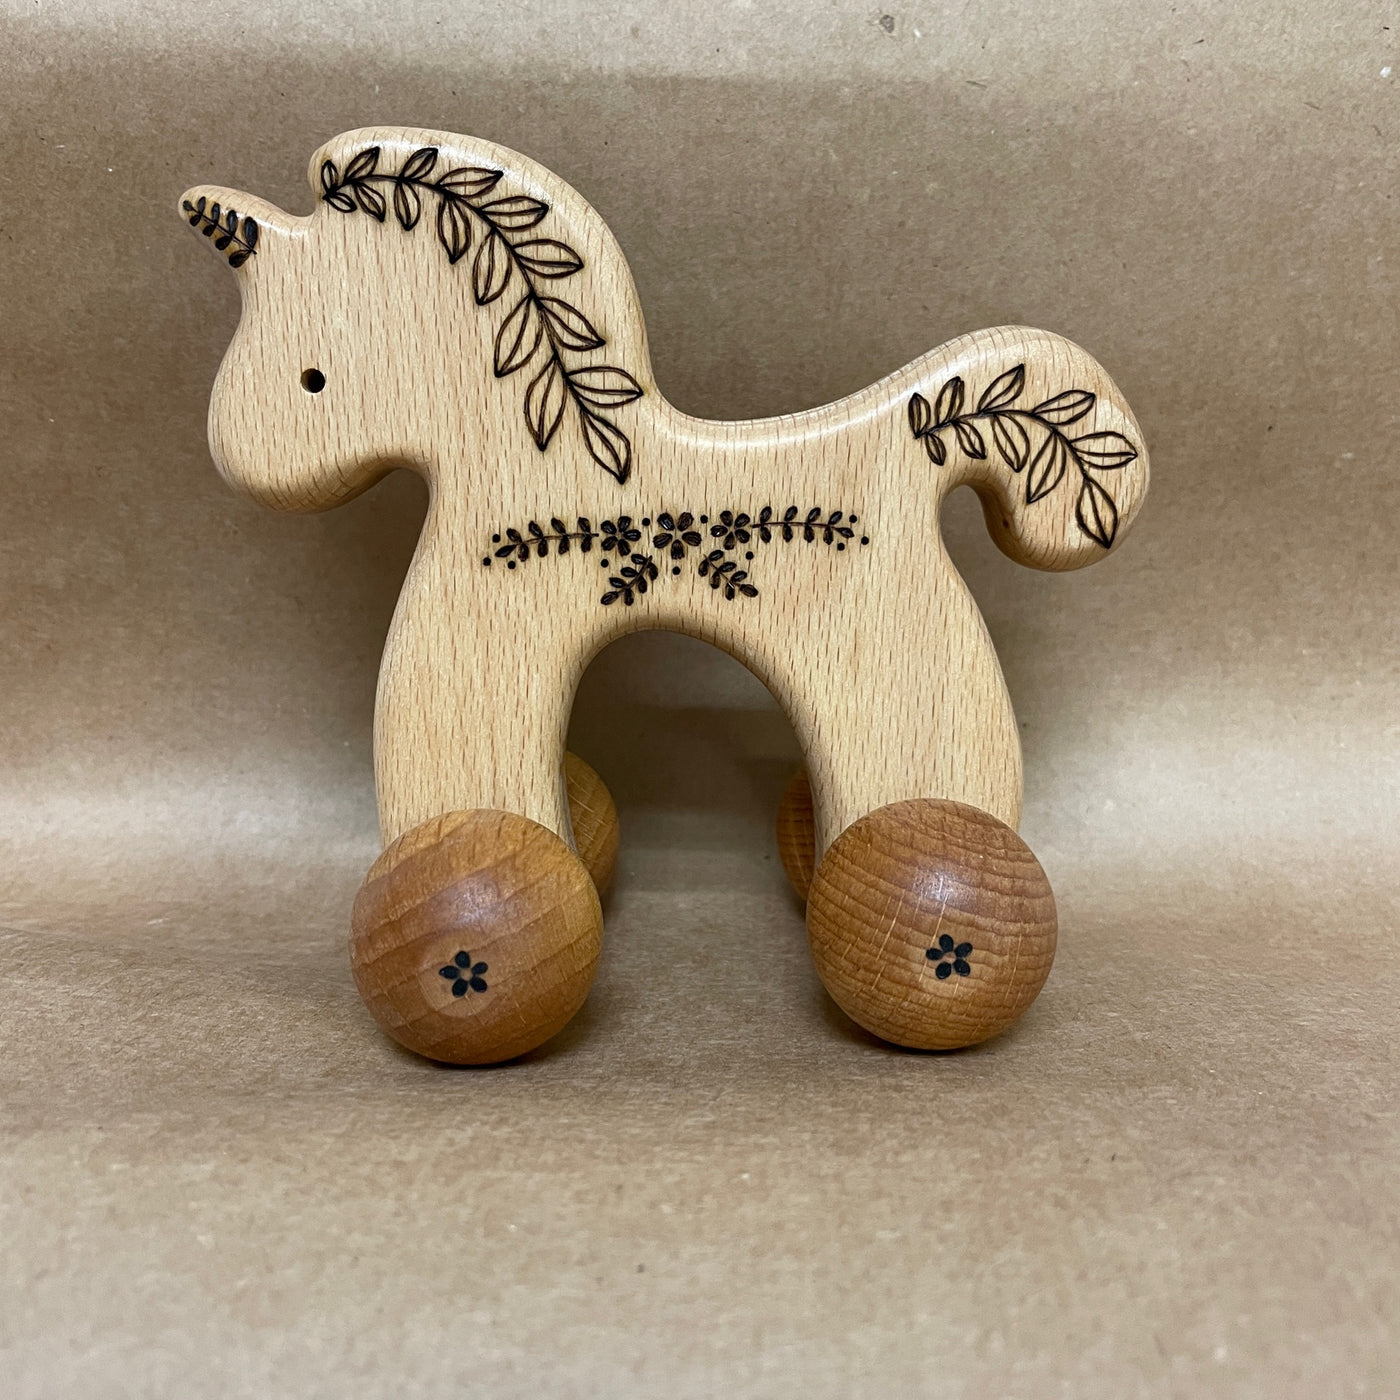 Sale Wooden Unicorn Push Toy with Floral Motif